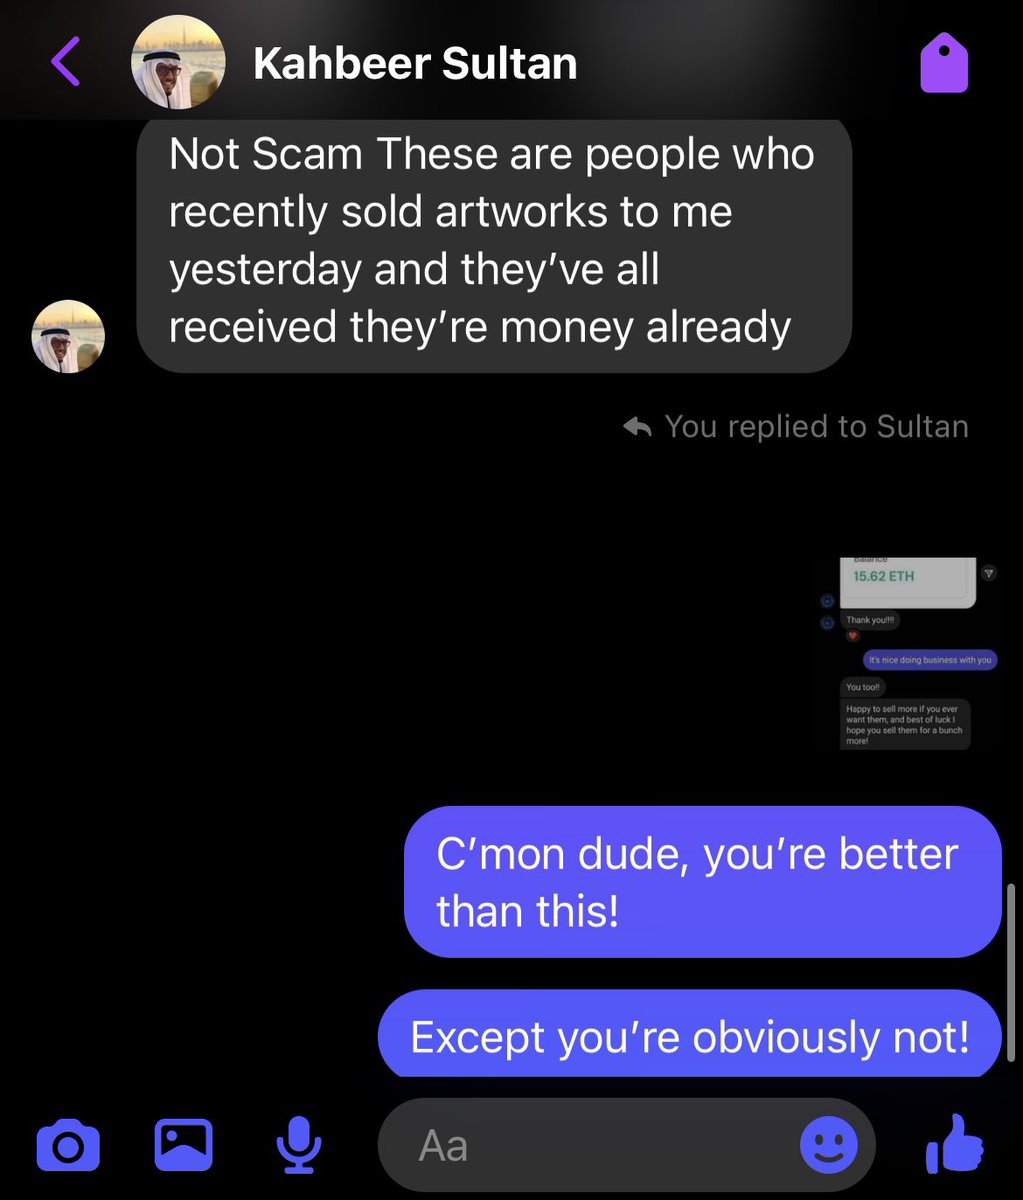 Do you seriously have nothing better to do than try to scam people online? 

#SkuLLivan #SLASHEROFSCAMMERS #scam #scammer #scammeralert #NONFT #NFTSAREDEAD #areyouserious